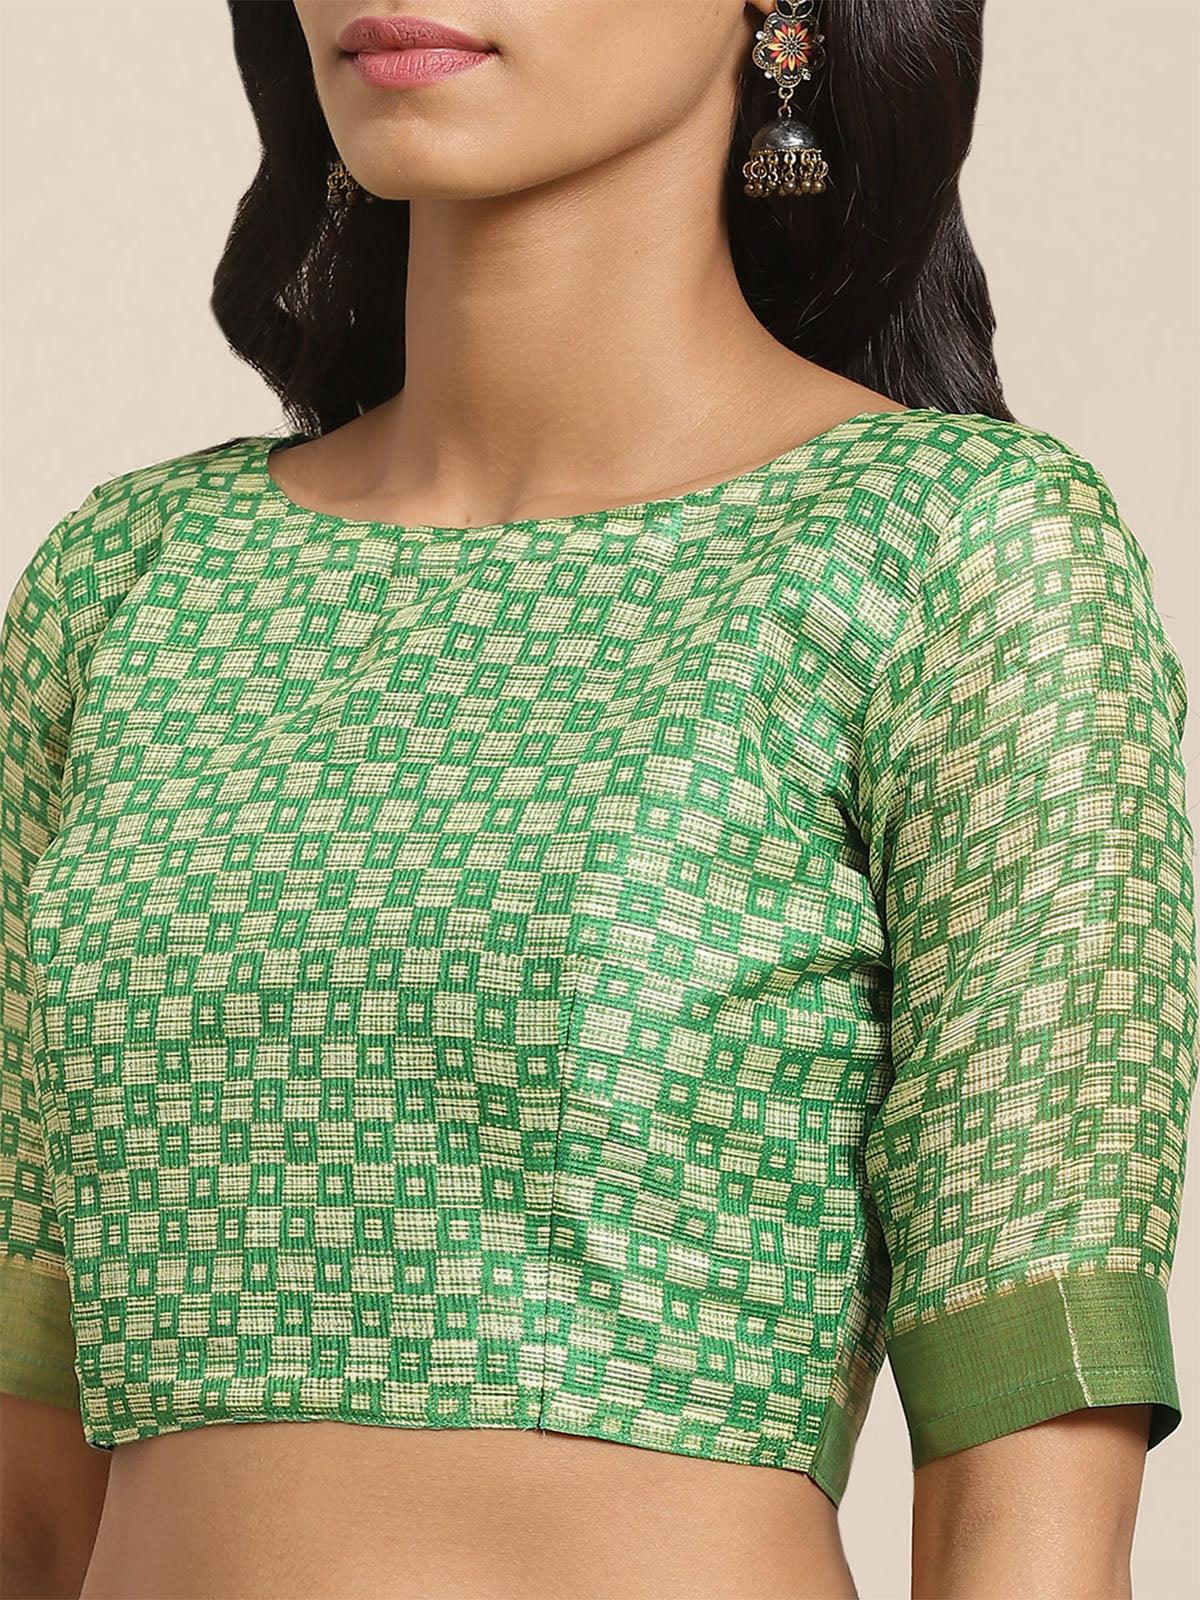 Women's Green Casual Silk Blend Printed Saree With Unstitched Blouse - Odette